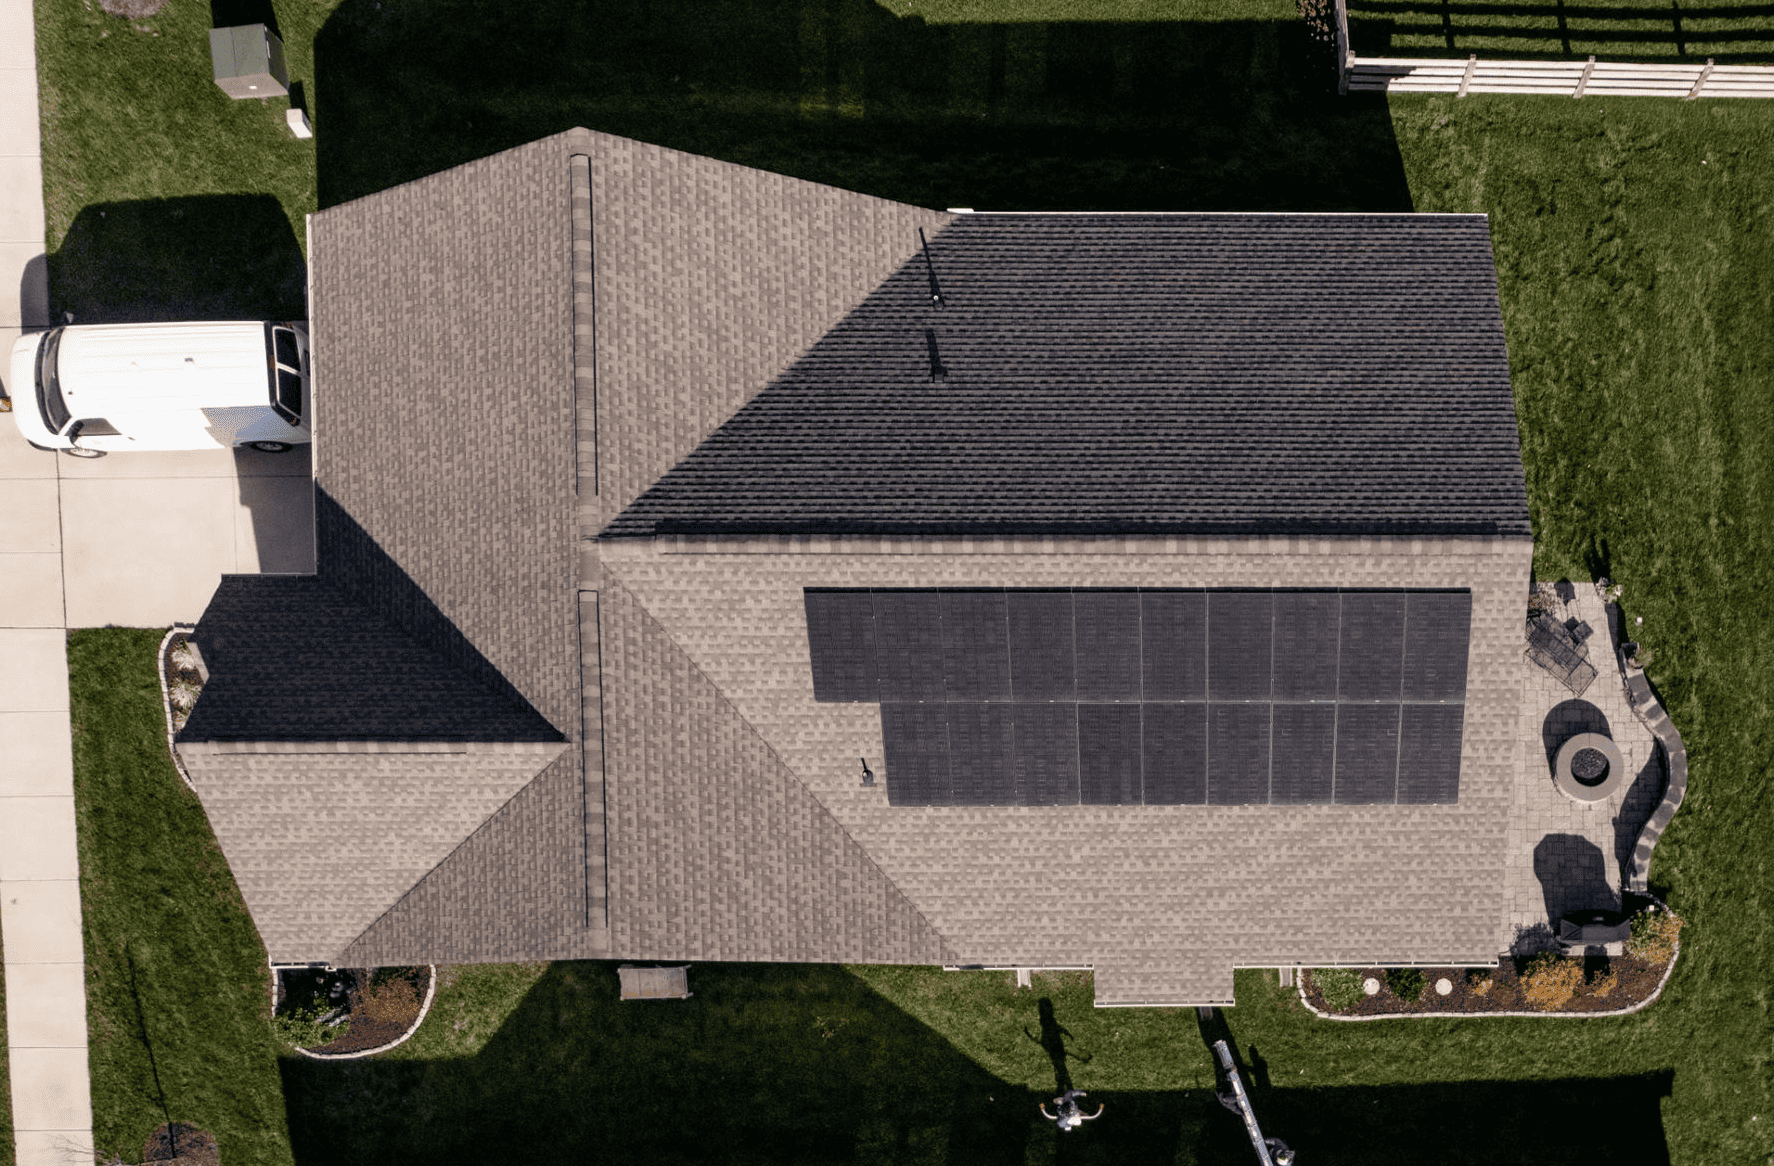 residential home with solar panels on roof